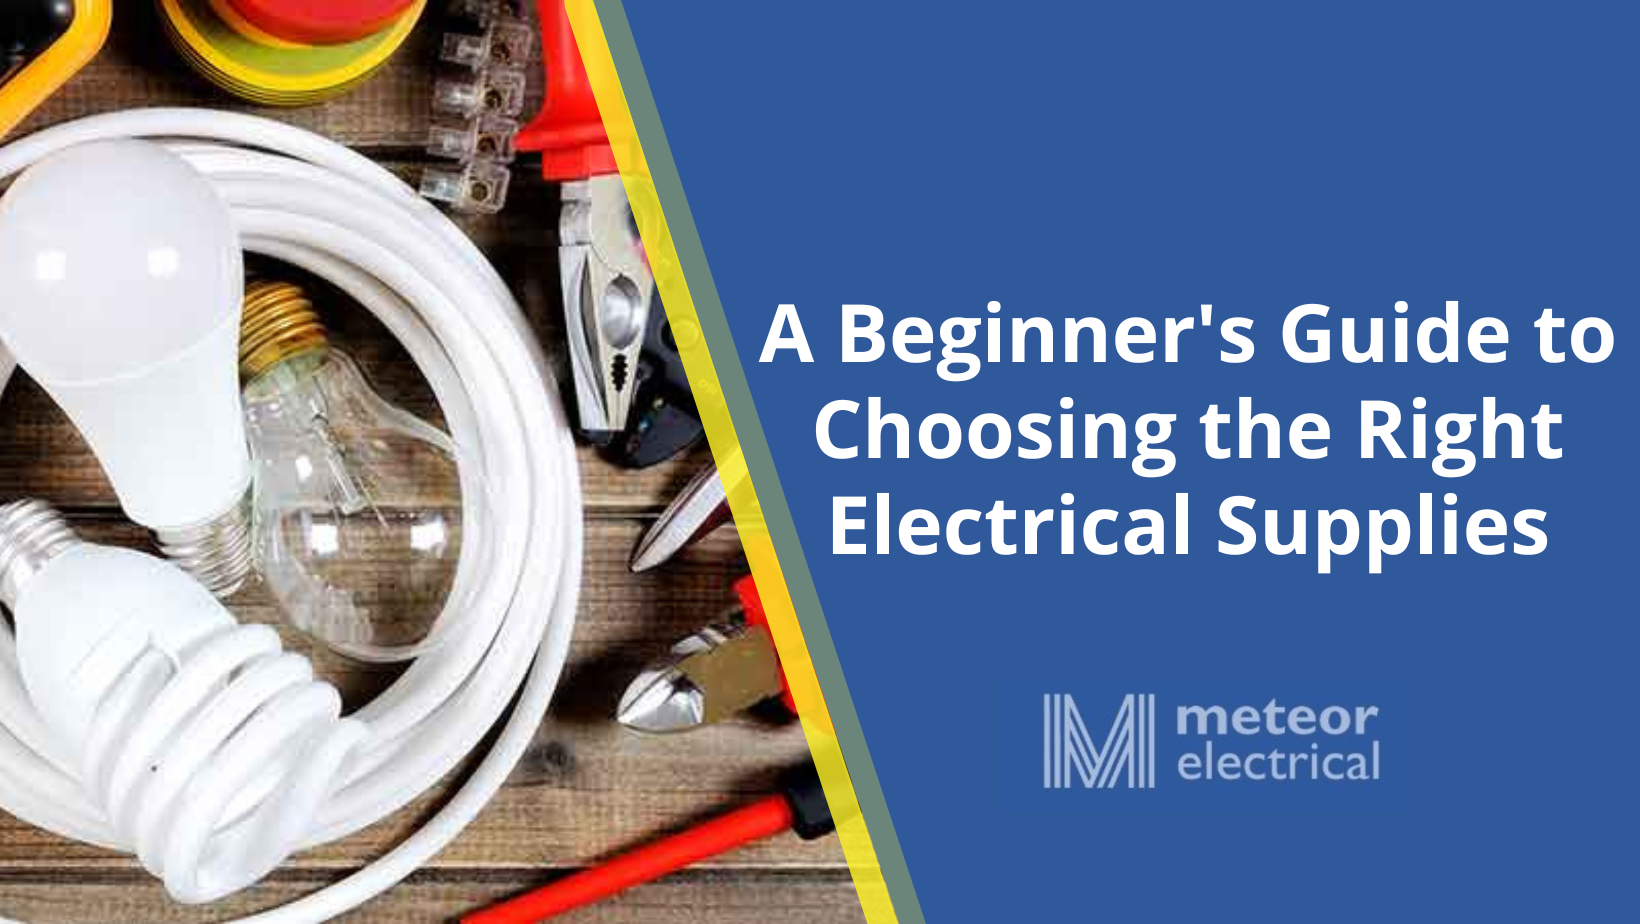 A Beginner's Guide to Choosing the Right Electrical Supplies